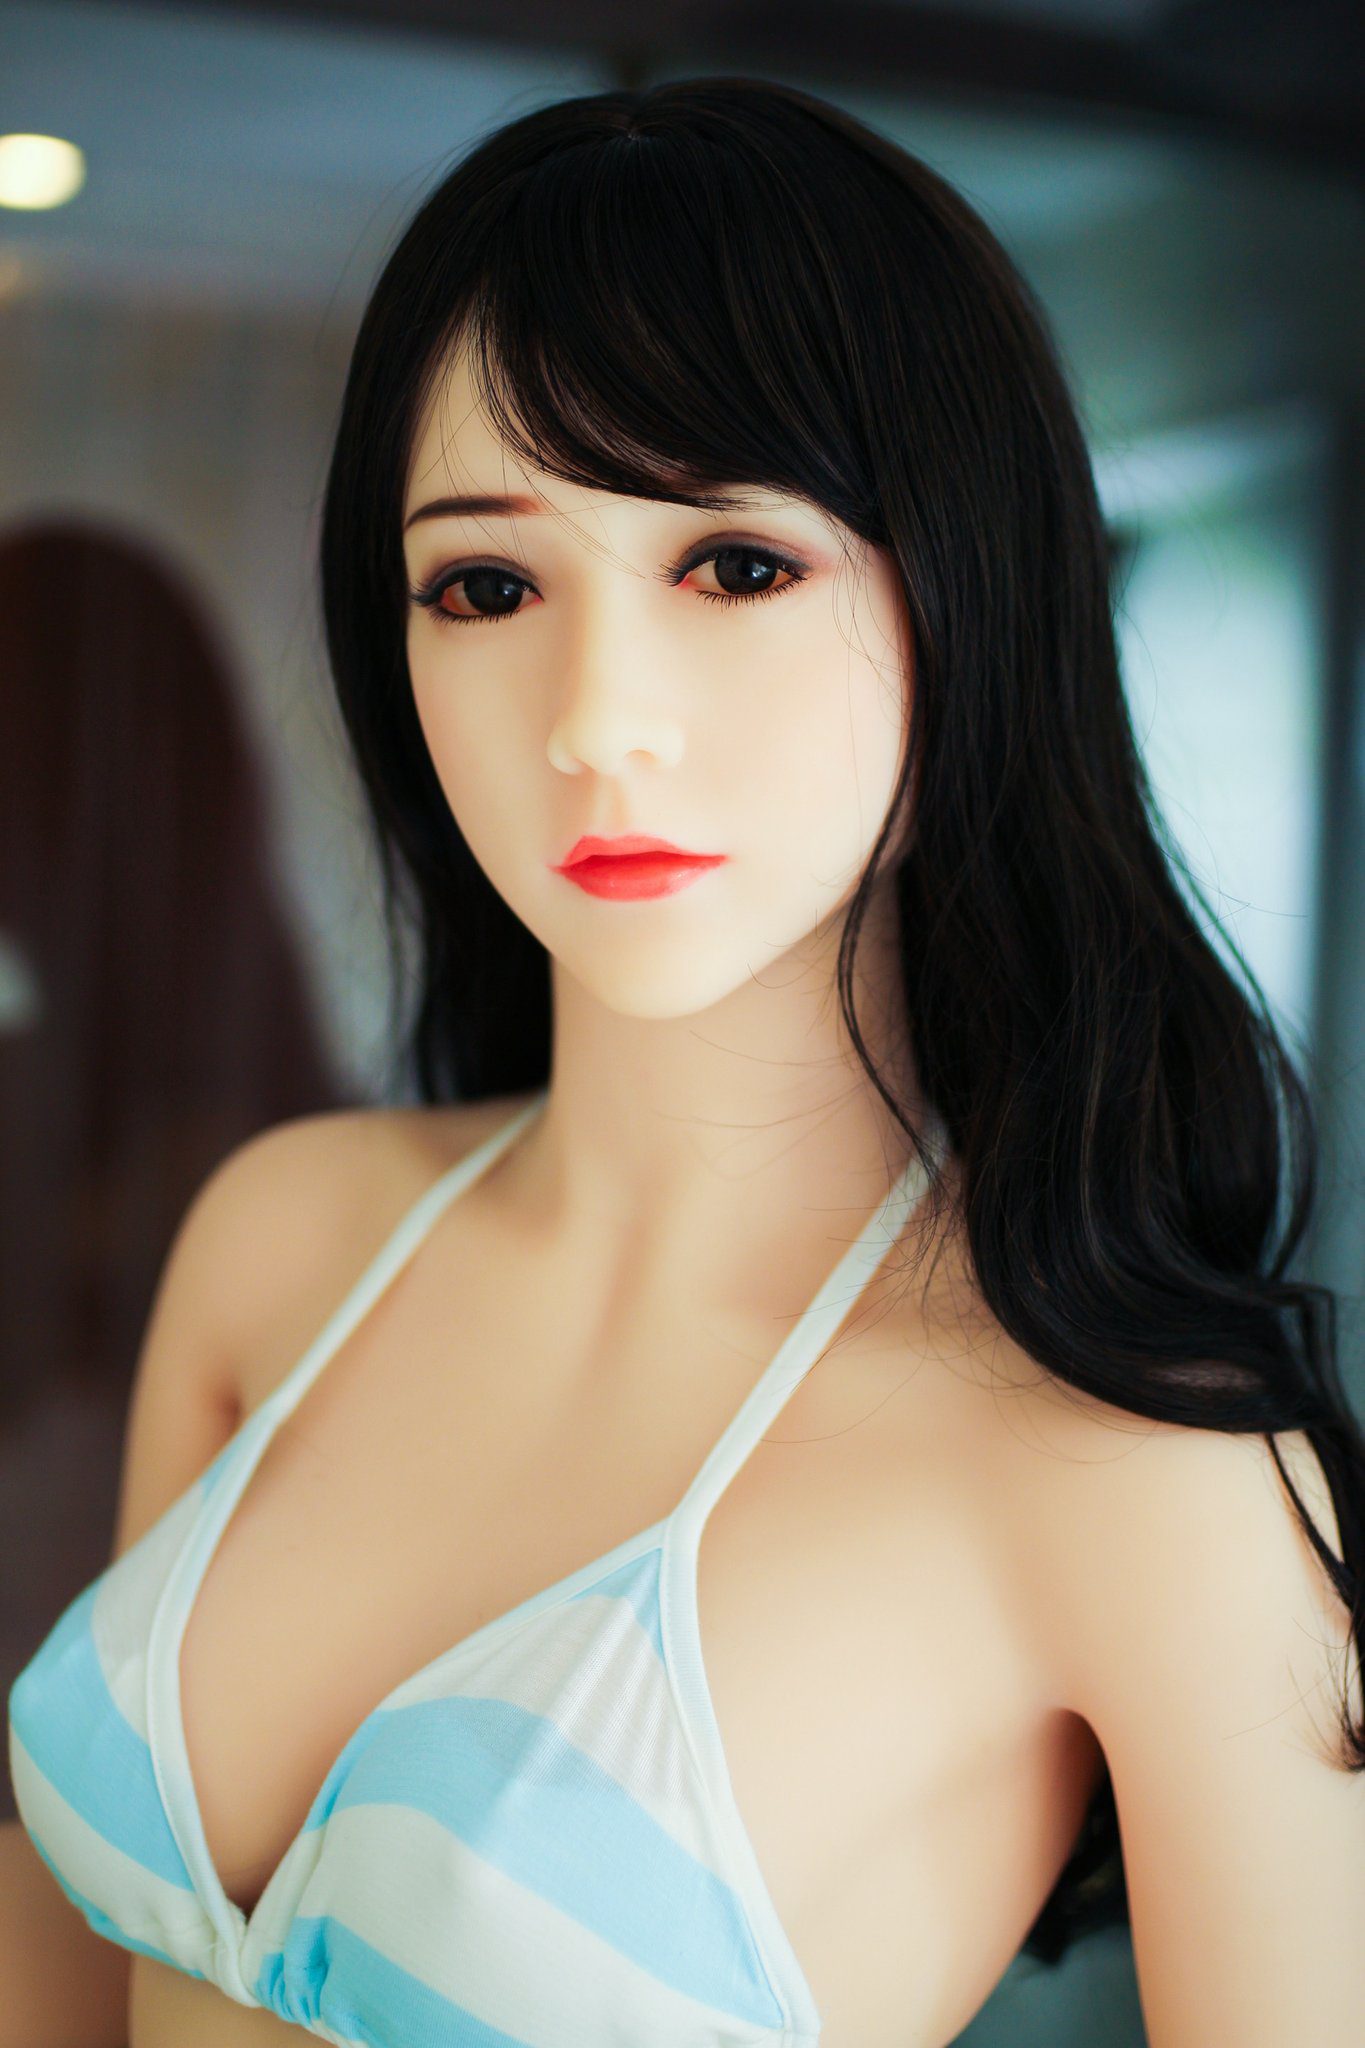 Mei – Classic Sex Doll 5′2” (158cm) Cup C Gel filled breast Ready-to-ship